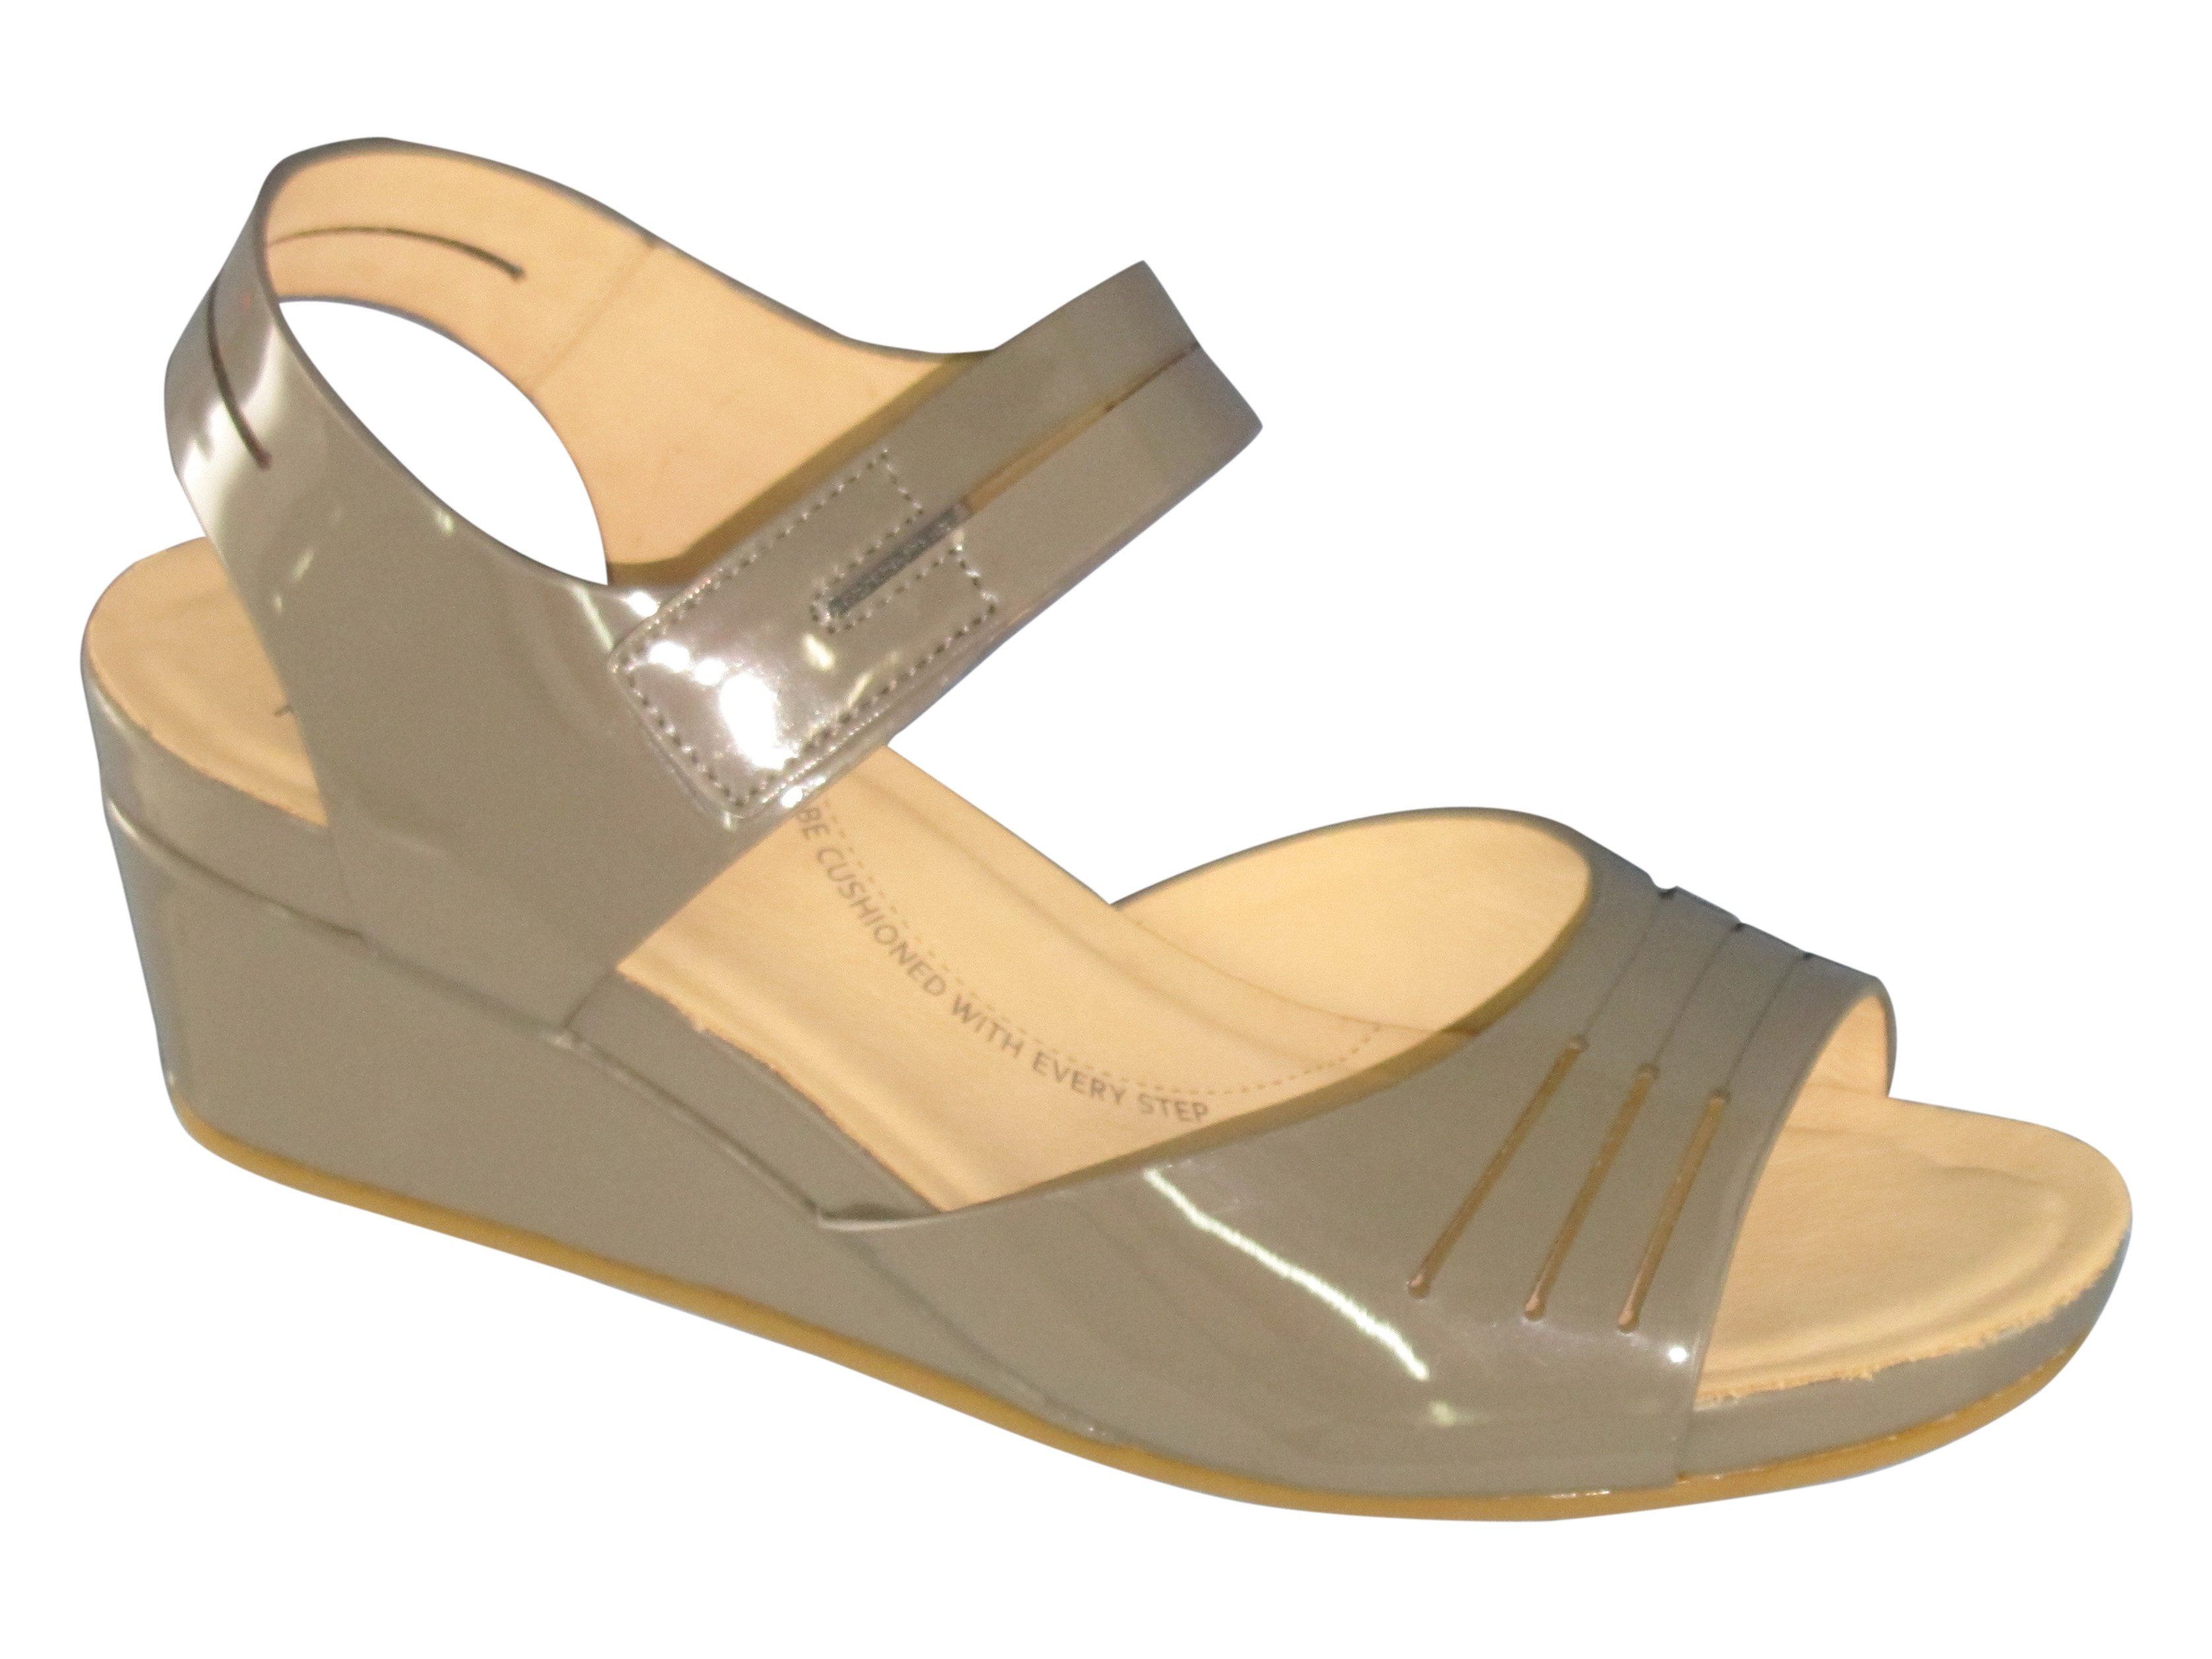 UMA ZIERA - WOMENS SHOES-SANDALS - low to flat : Shirley's Shoes - SS16 ...